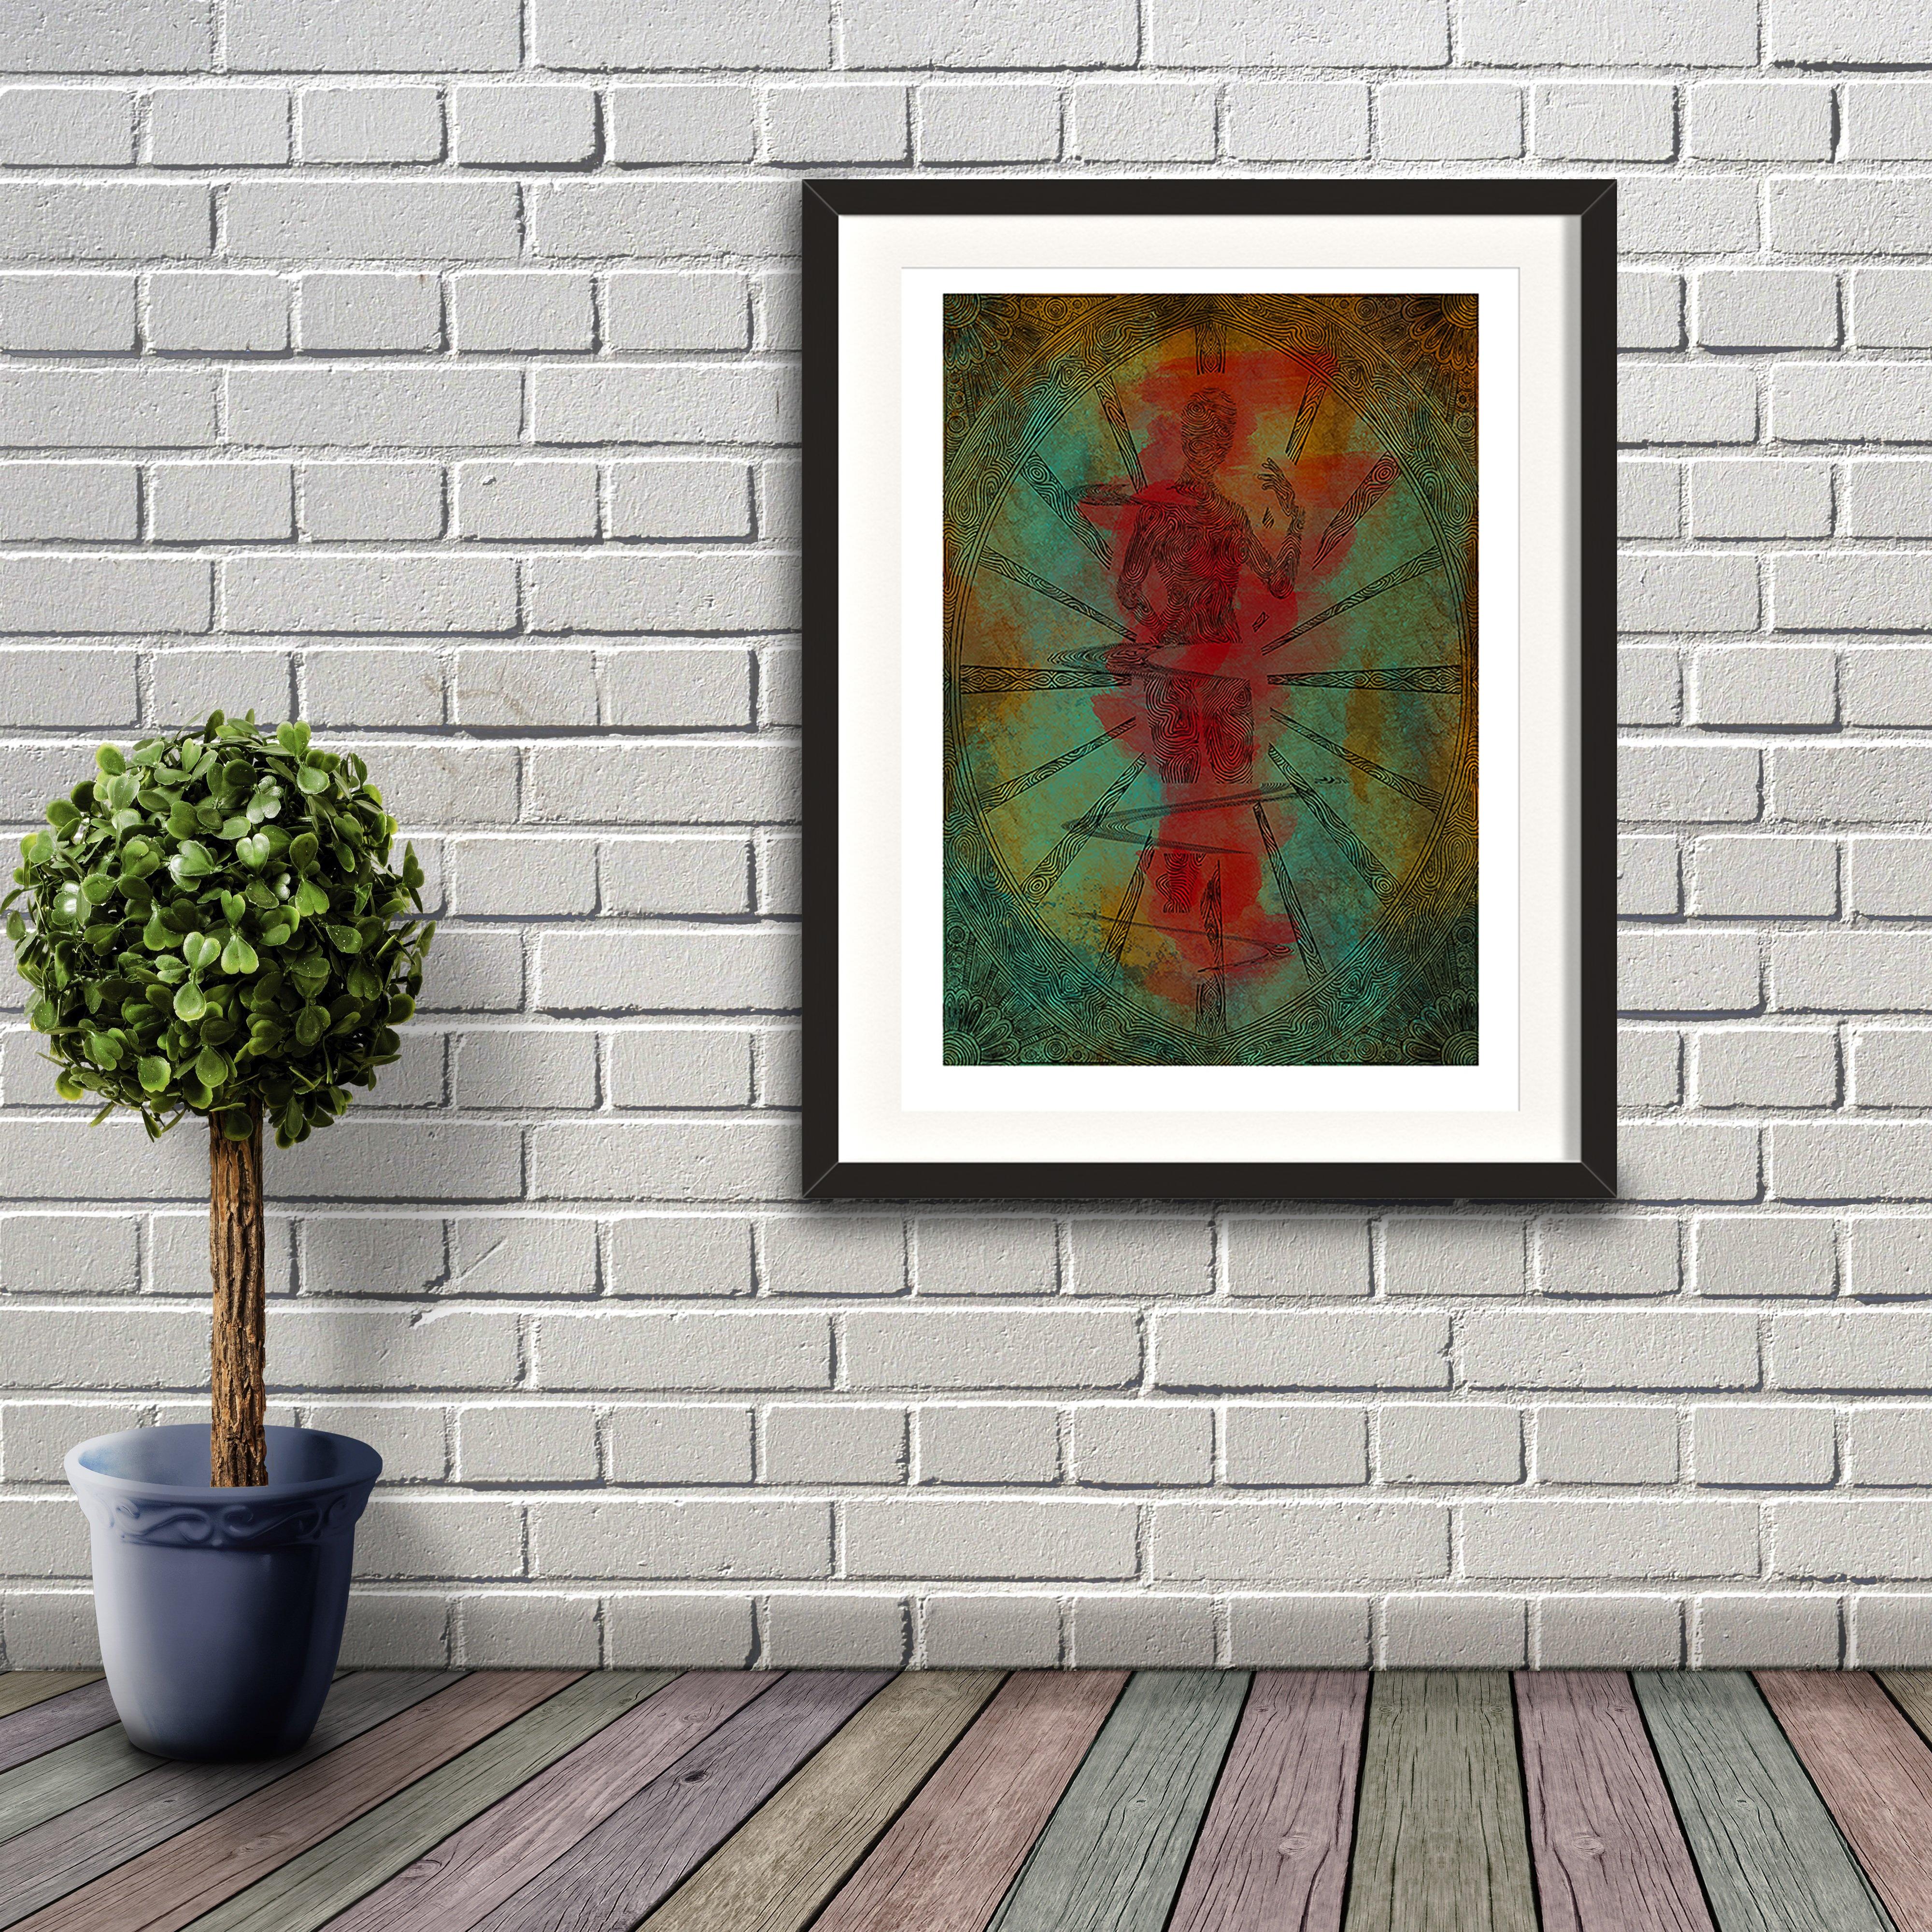 A digital painting by Lily Bourne printed on eco fine art paper titled Lifelines showing a black lined oval shape with a black lined figure within overcoloured in red and green. Artwork shown in a black frame hanging on a brick wall.